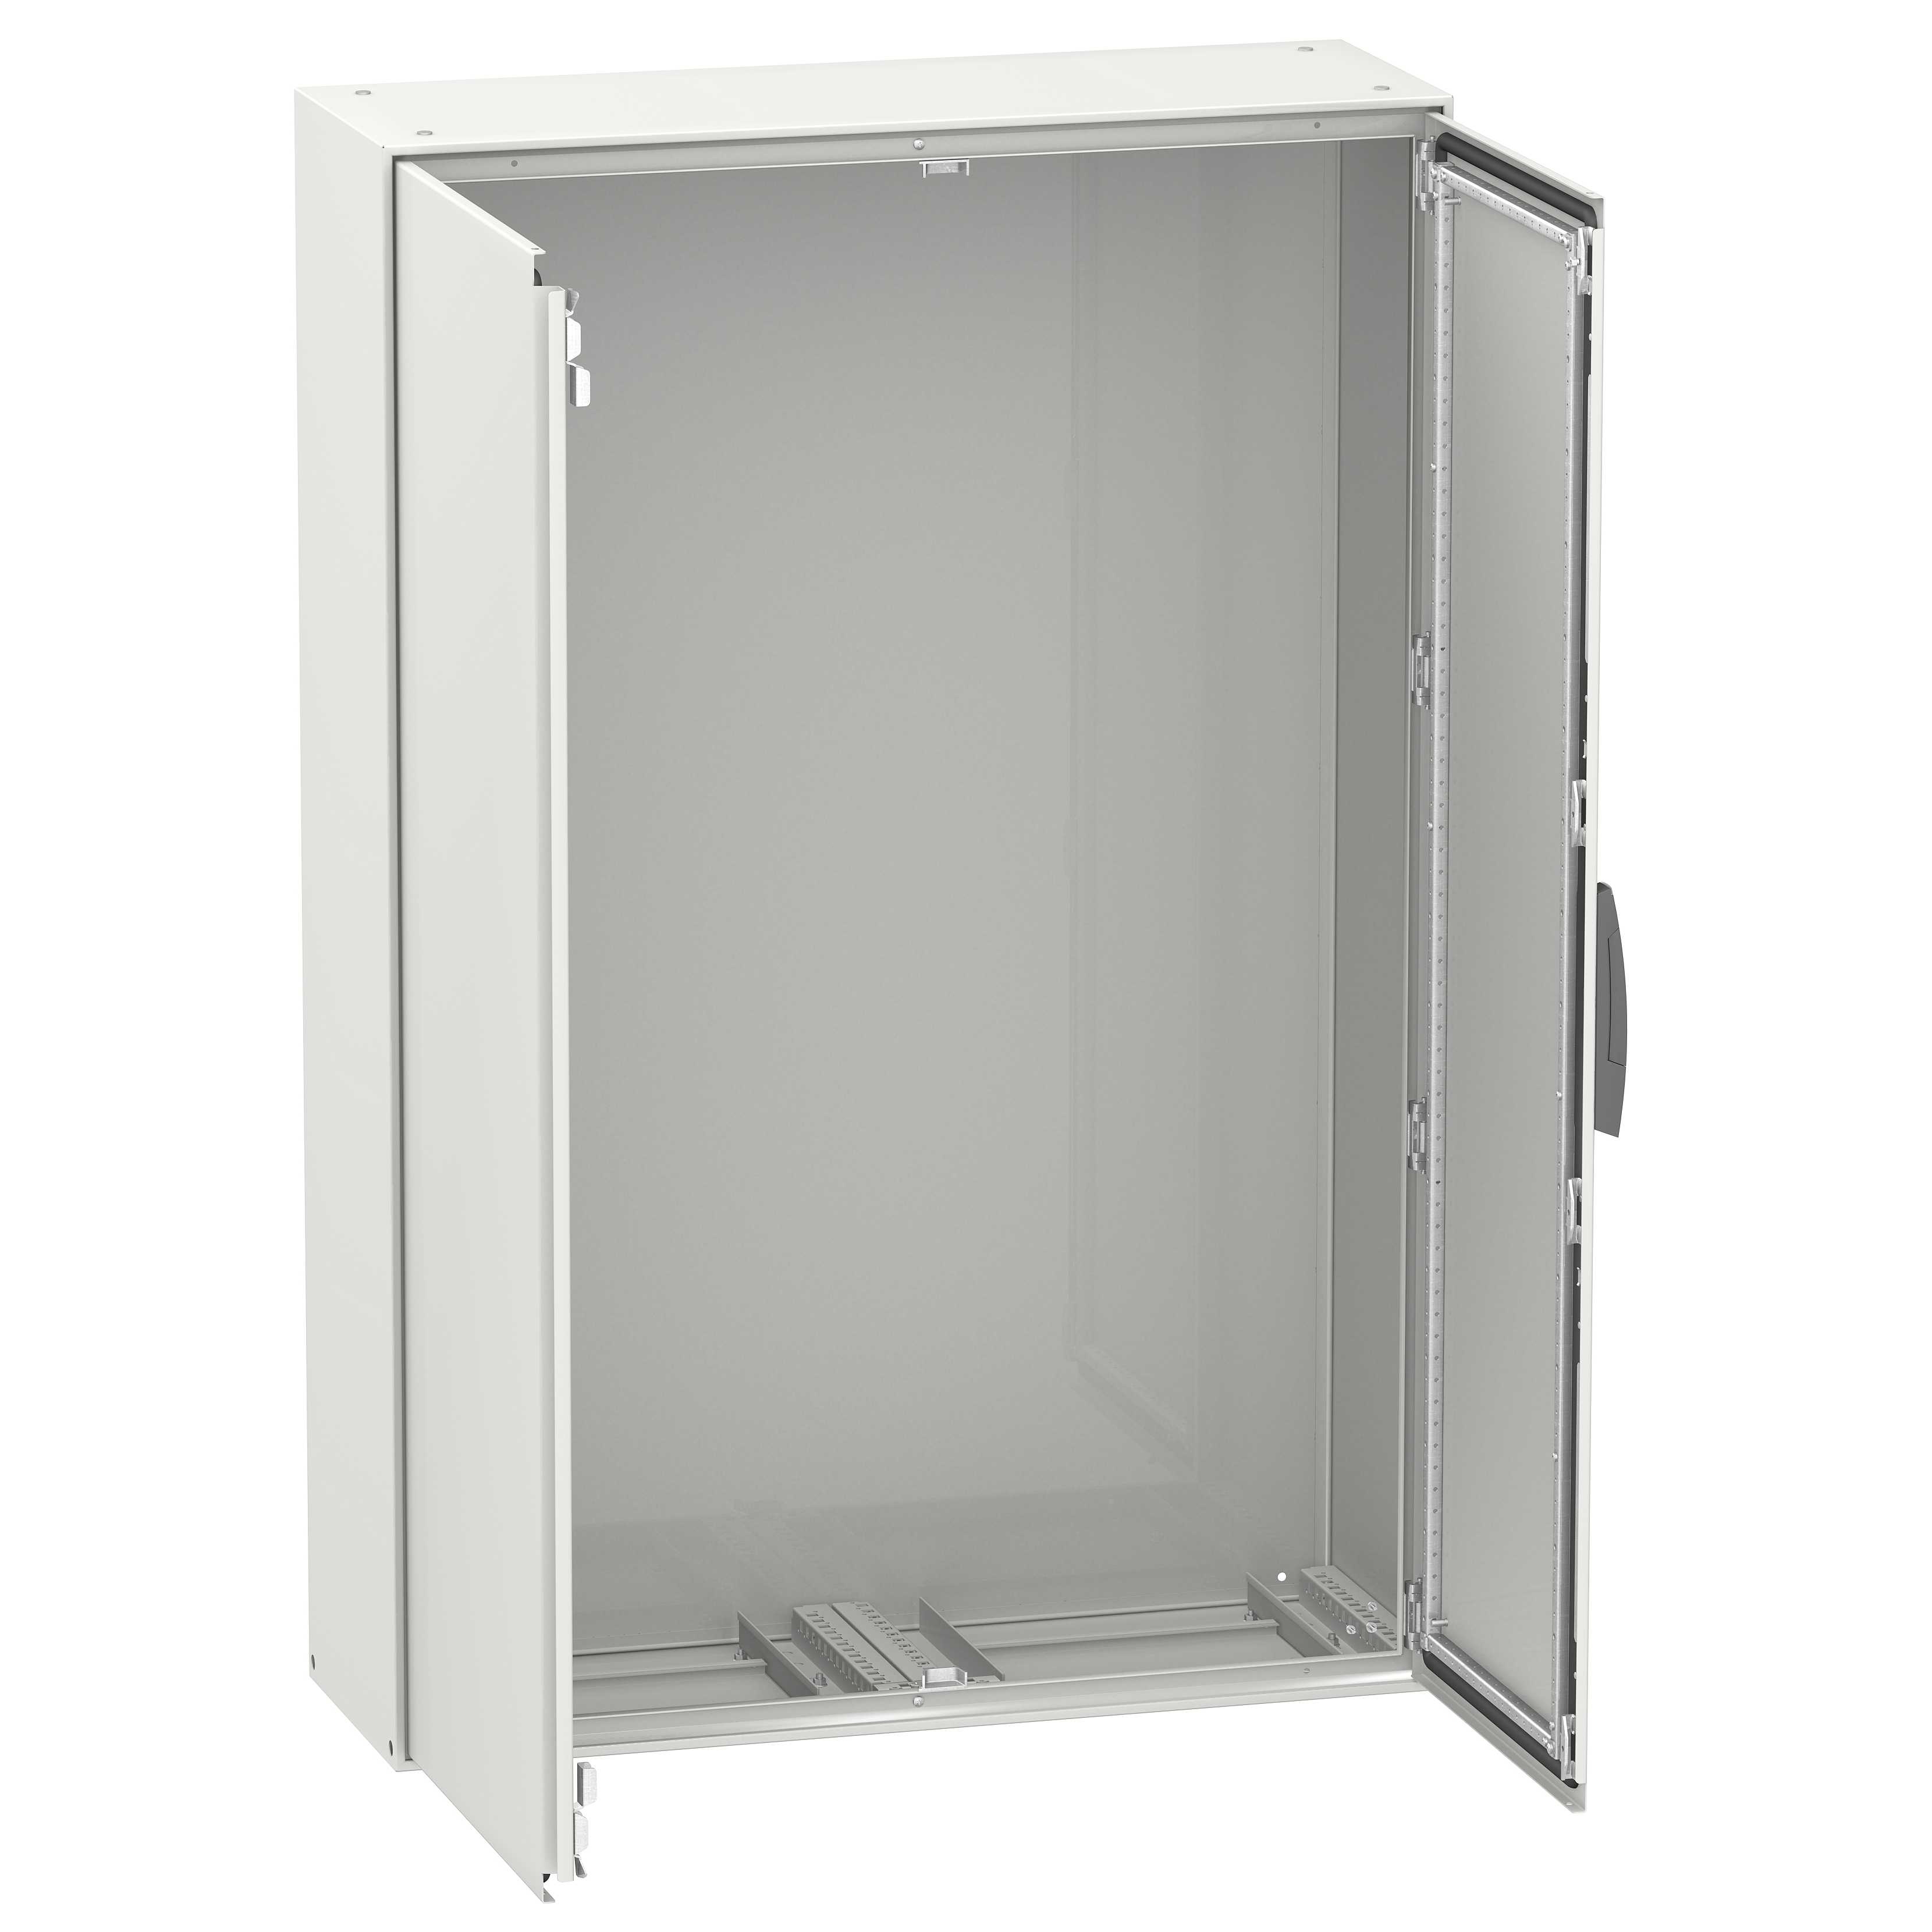 Spacial SM compact enclosure with mounting plate - 1800x1600x400 mm